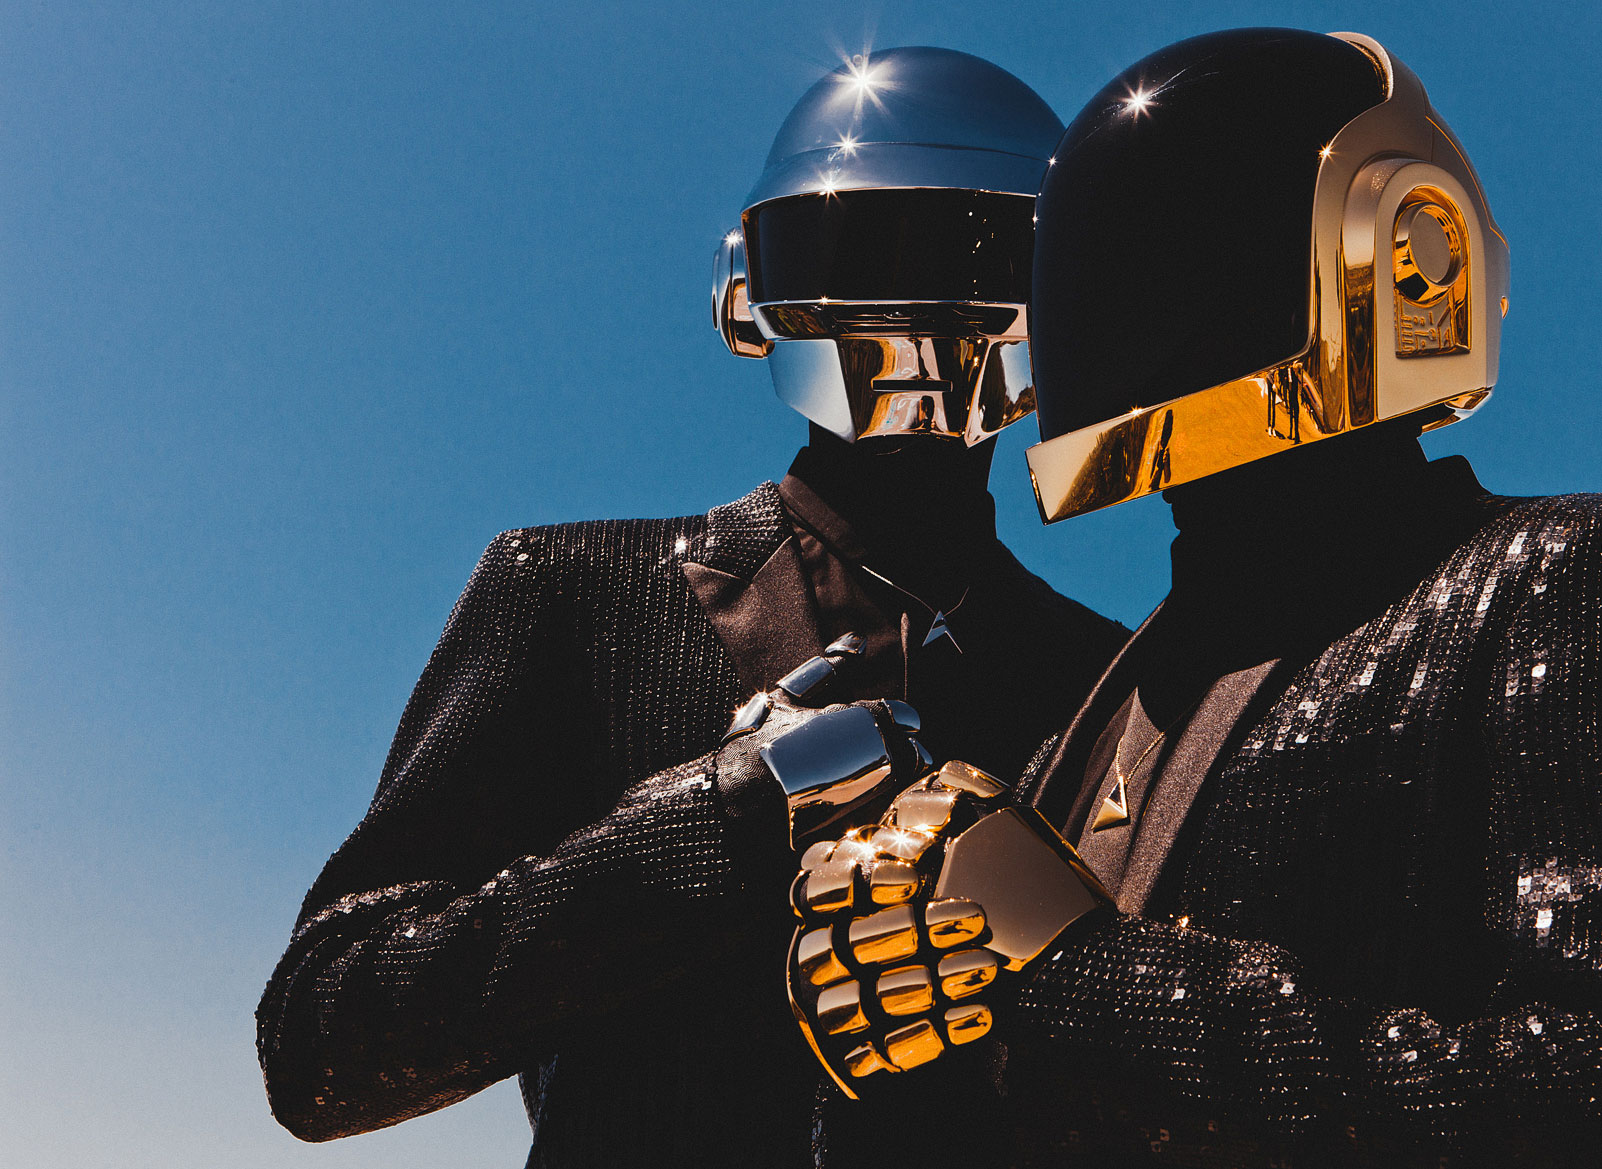 Daft Punk release “The Writing of Fragments of Time” from ‘RAM’ 10th Anniversary album